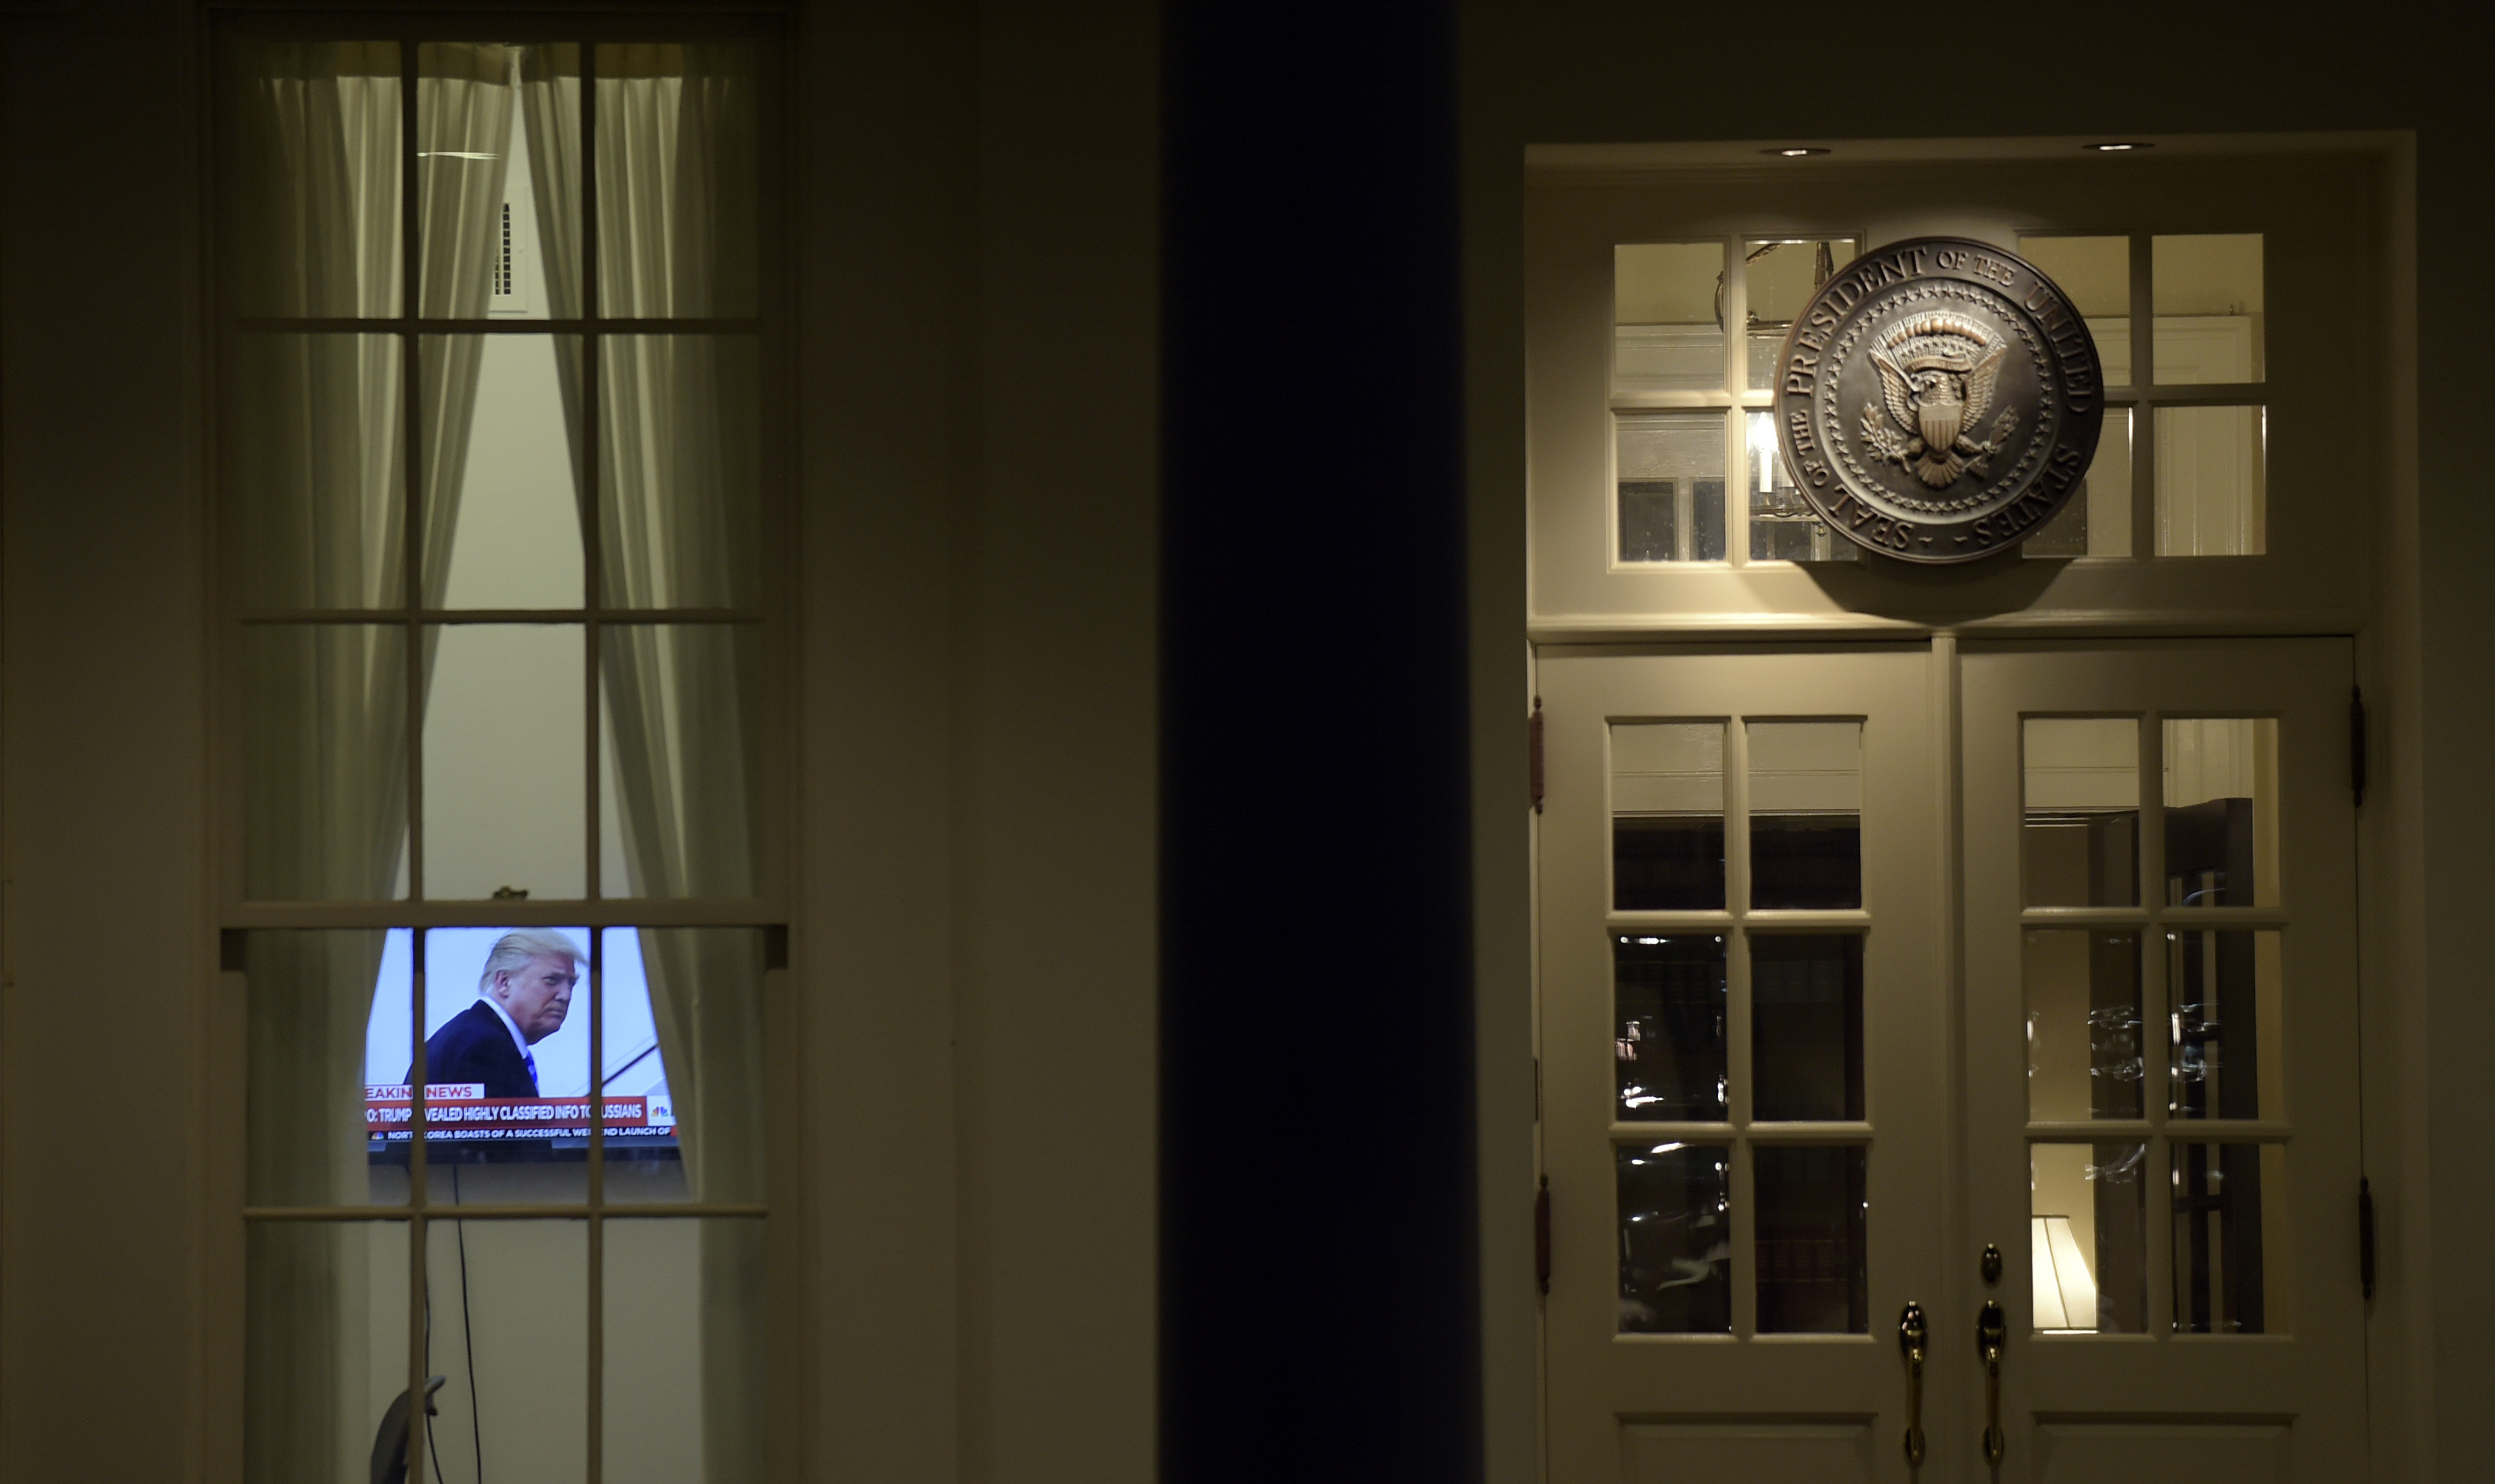 A television set is on in the West Wing of the White House in Washington, Monday, May 15, 2017. (AP Photo/Susan Walsh)